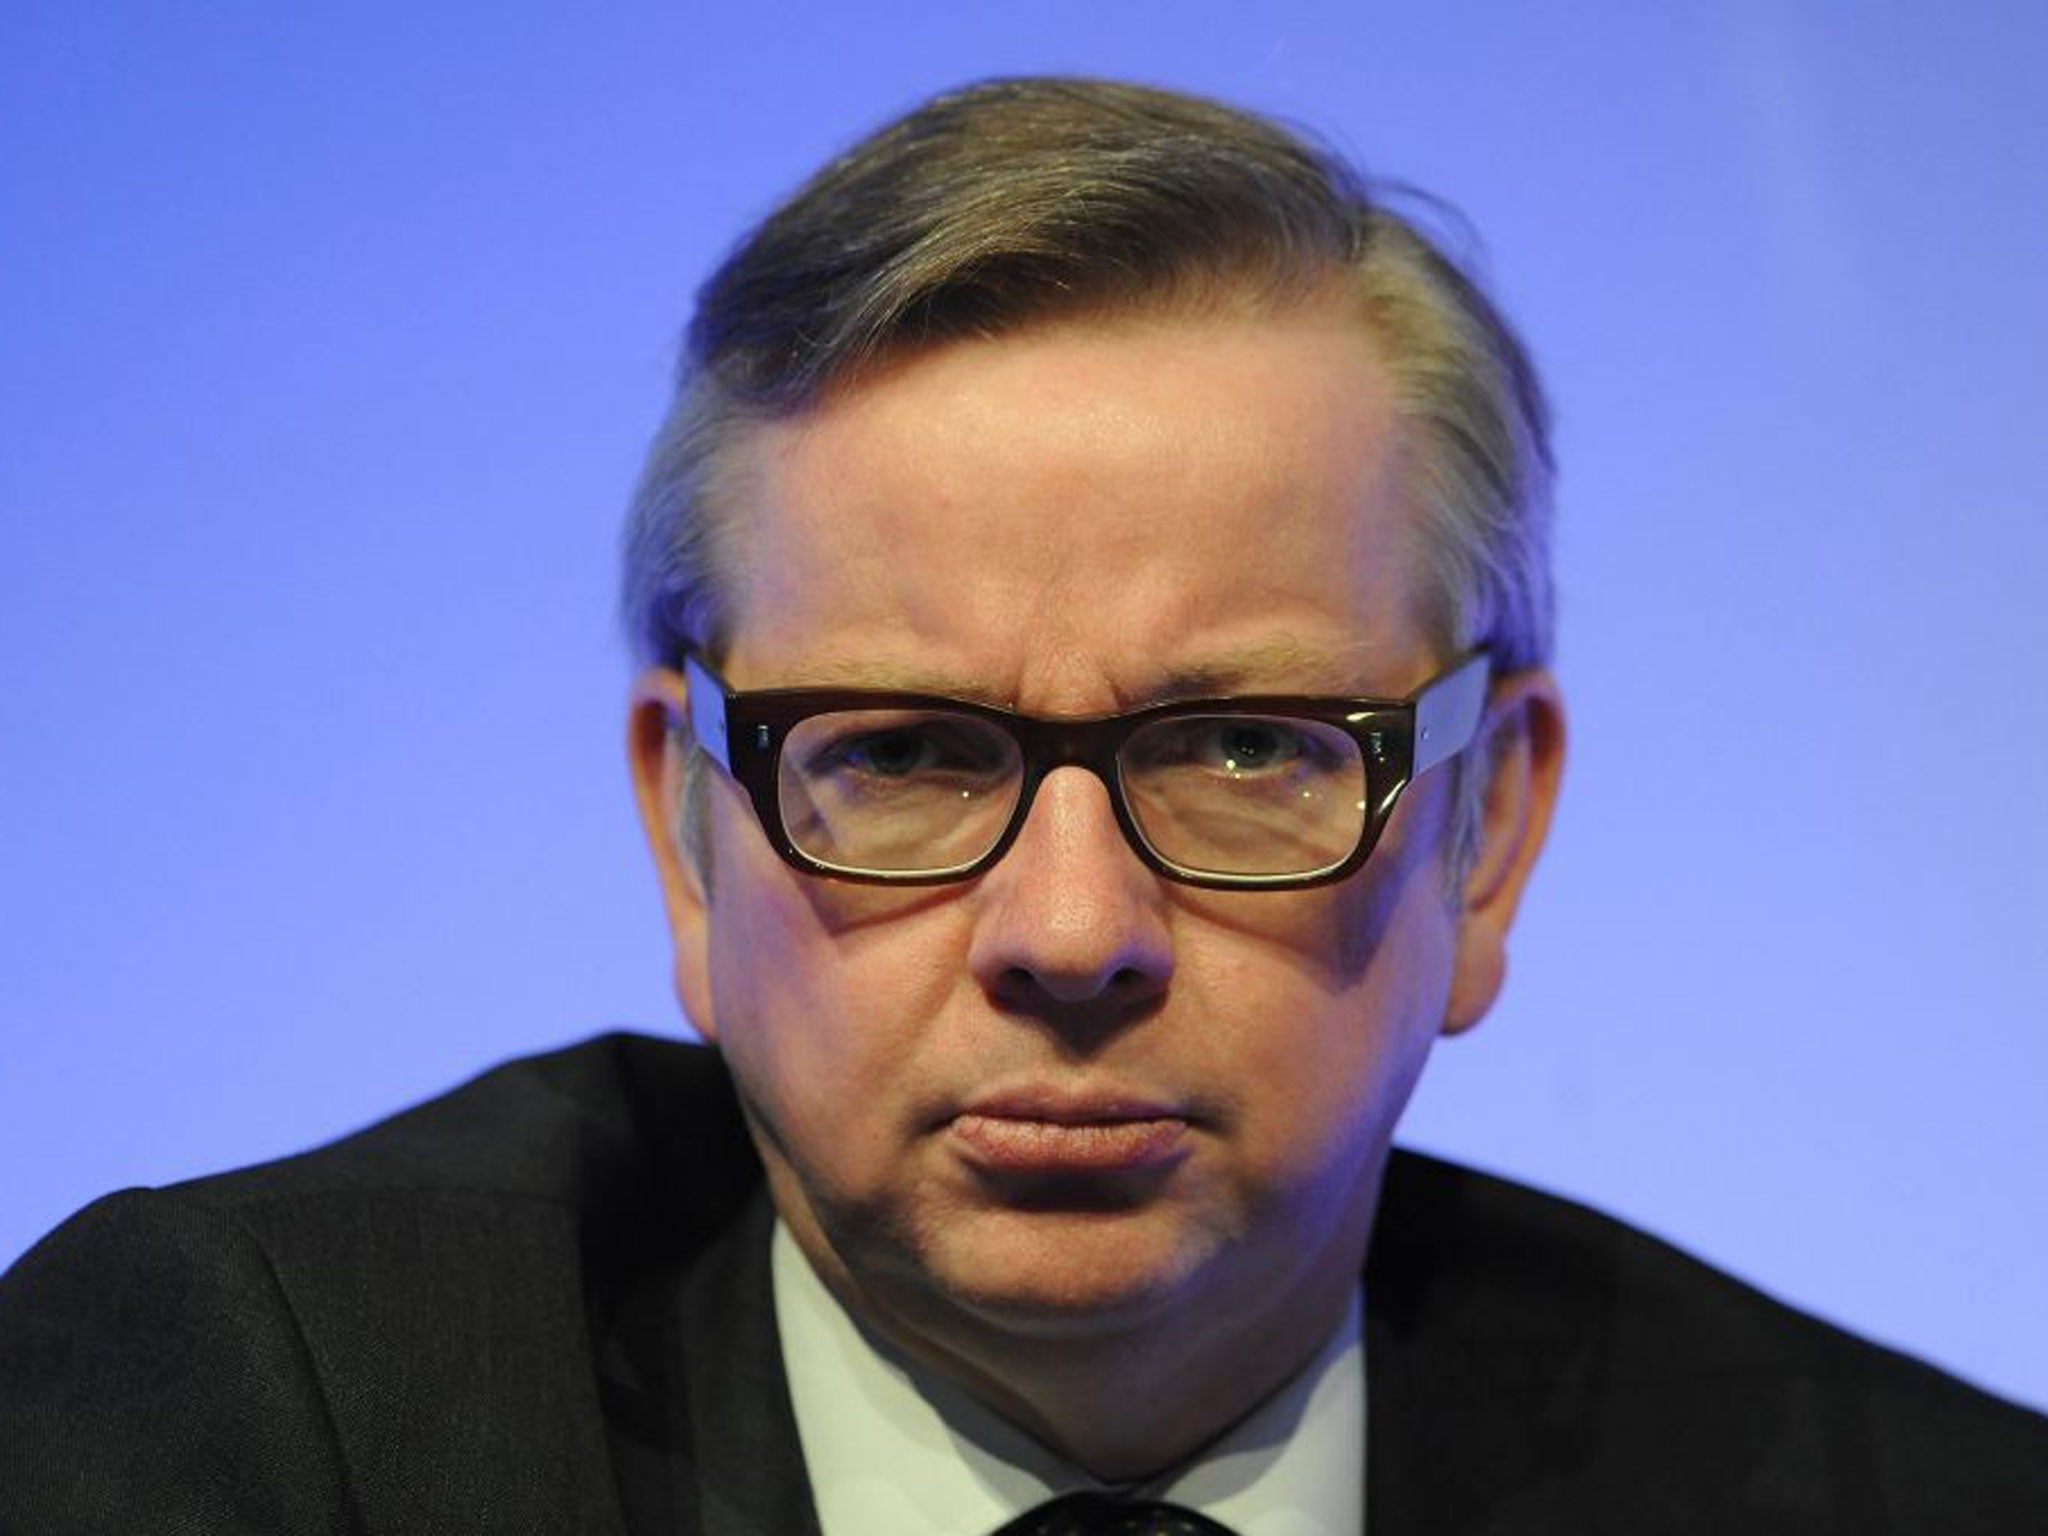 The Education Secretary Michael Gove’s department has been censured by public spending watchdogs over a plan to set up a state boarding school for inner-city children in the heart of the Sussex countryside